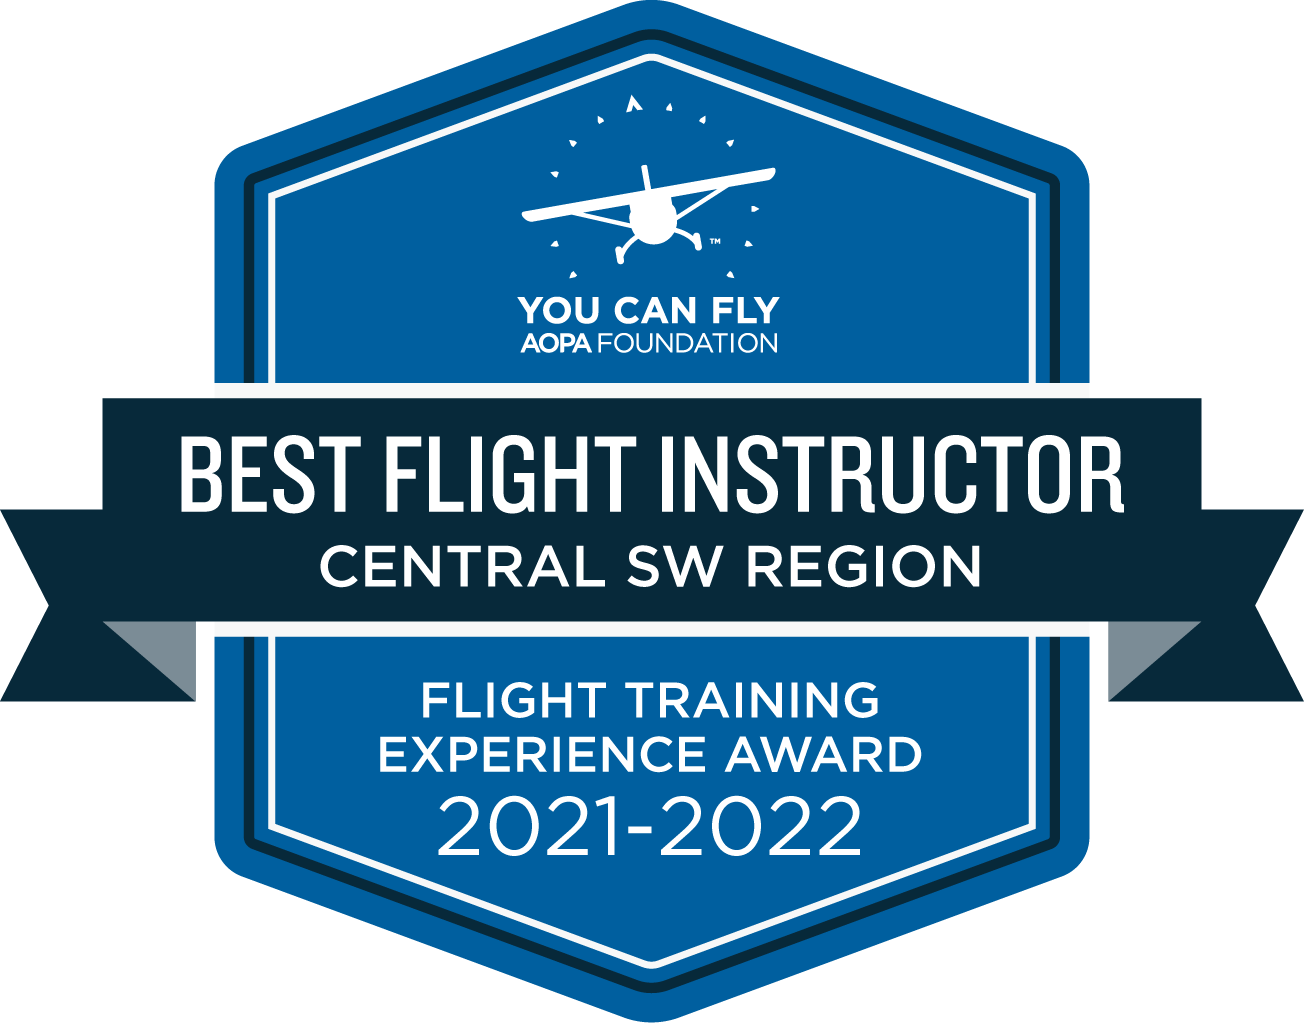 AOPA Awarded Norm Rathje "Best Flight Instructor in the Central SouthWest United States" for 2021-2022